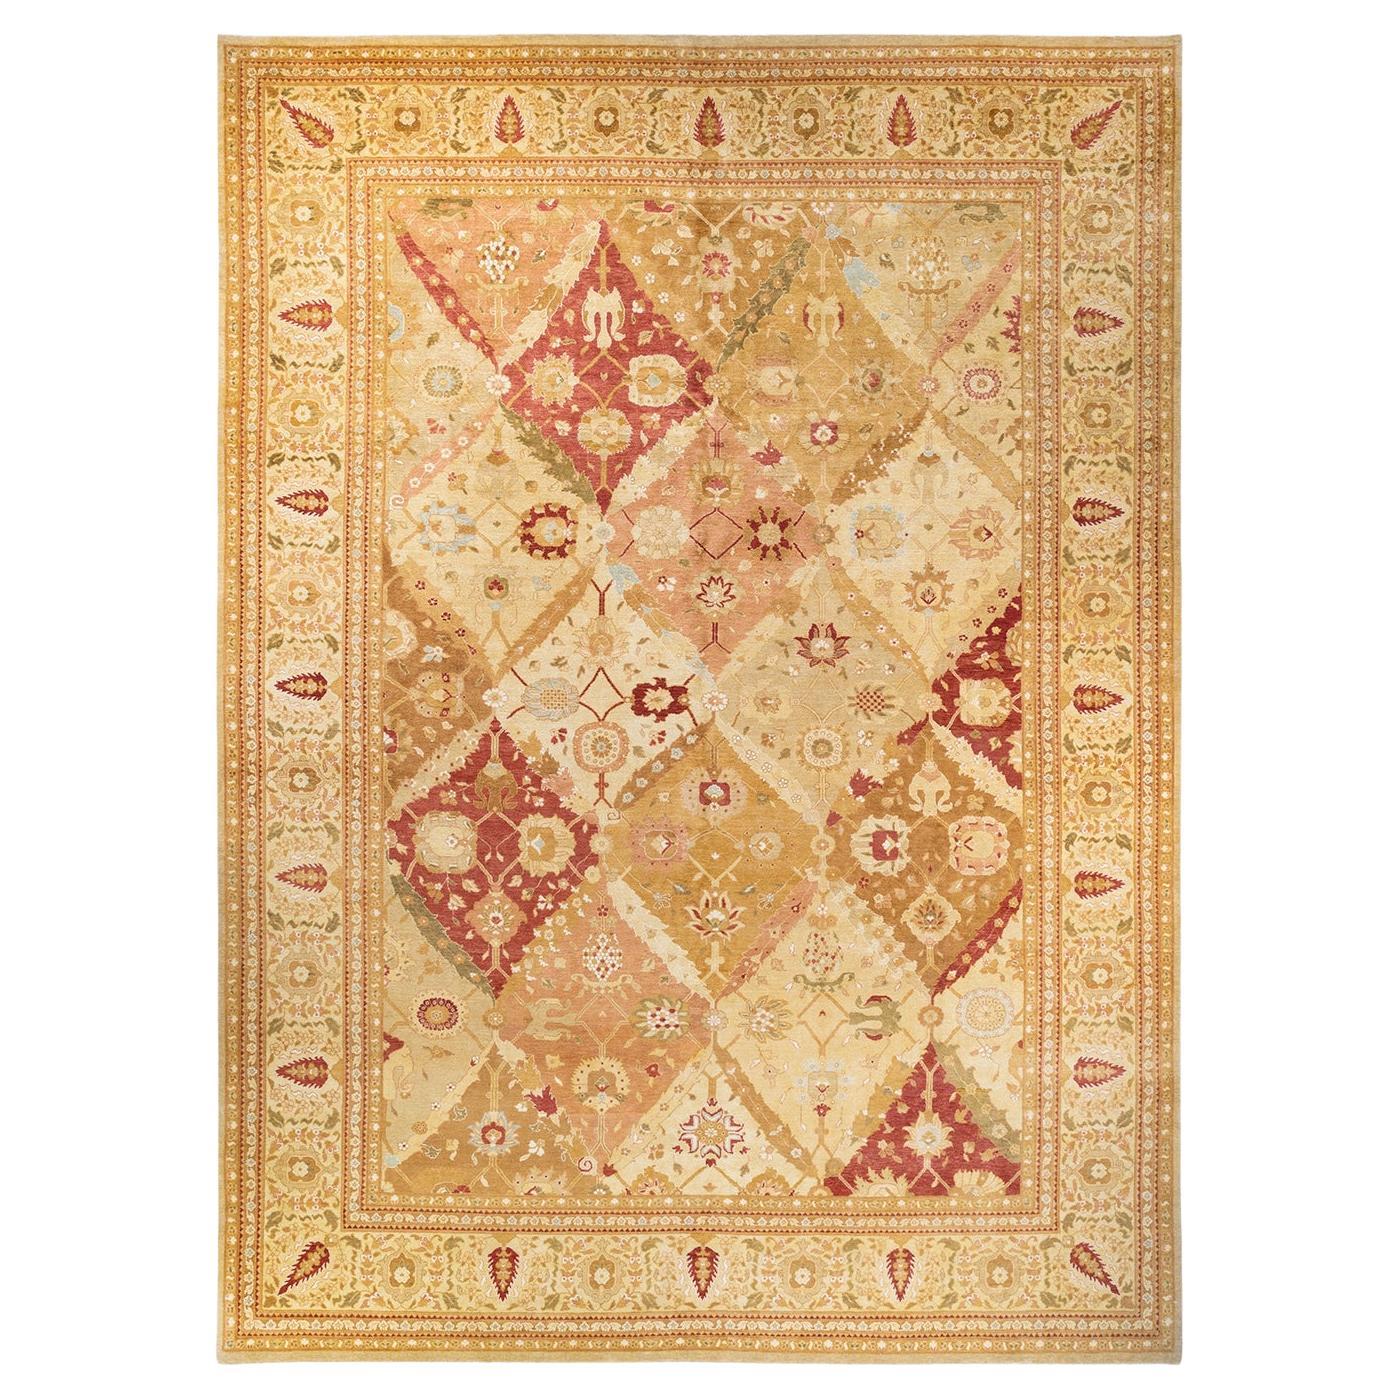 One of a Kind Hand Knotted Contemporary Floral Eclectic Ivory Area Rug